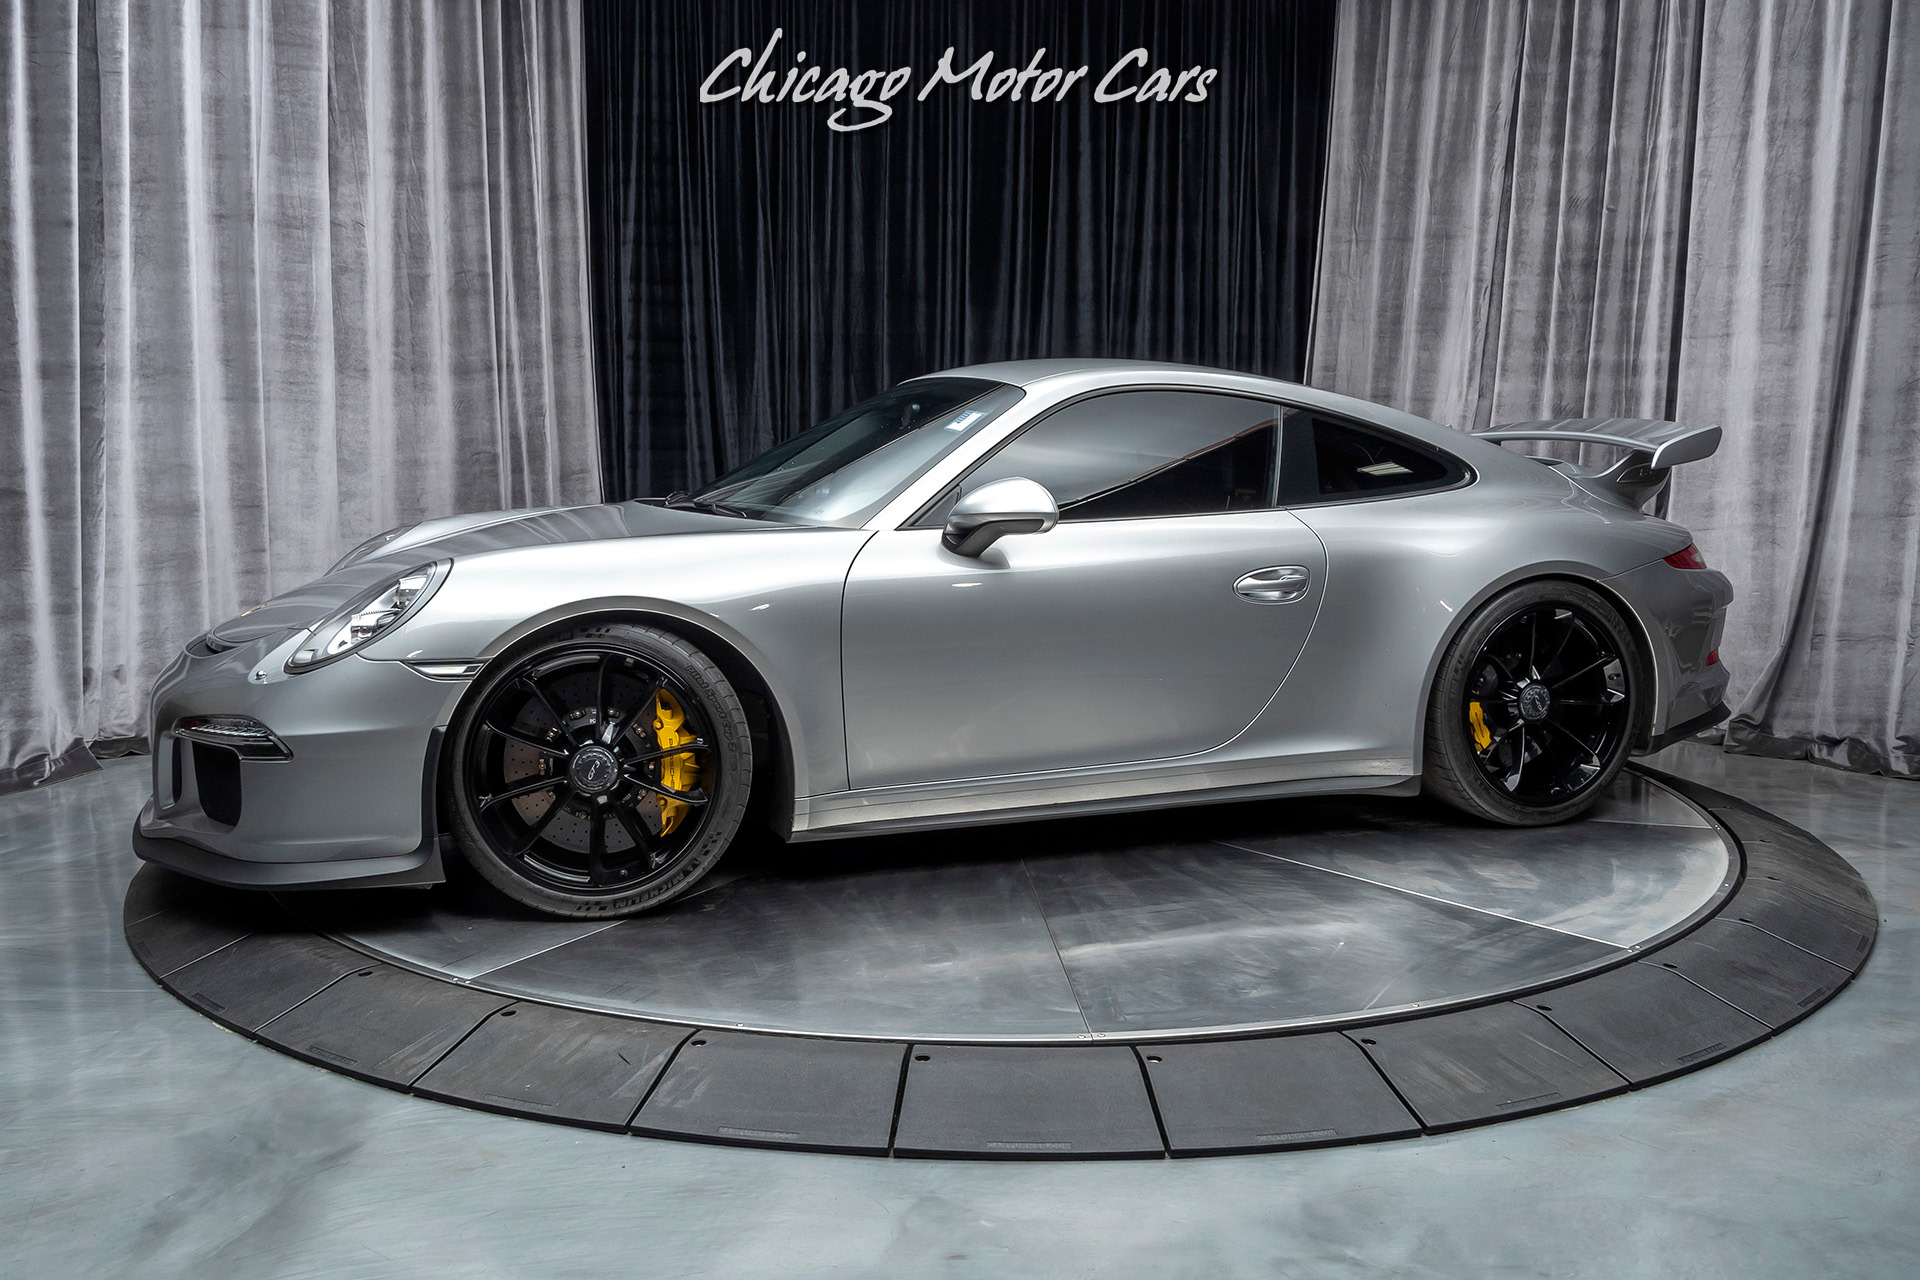 Used-2015-Porsche-911-GT3-Coupe-MSRP-158k-Ceramic-Brakes-Axle-Lift-Carbon-Buckets-GMG-Upgrades-CPO